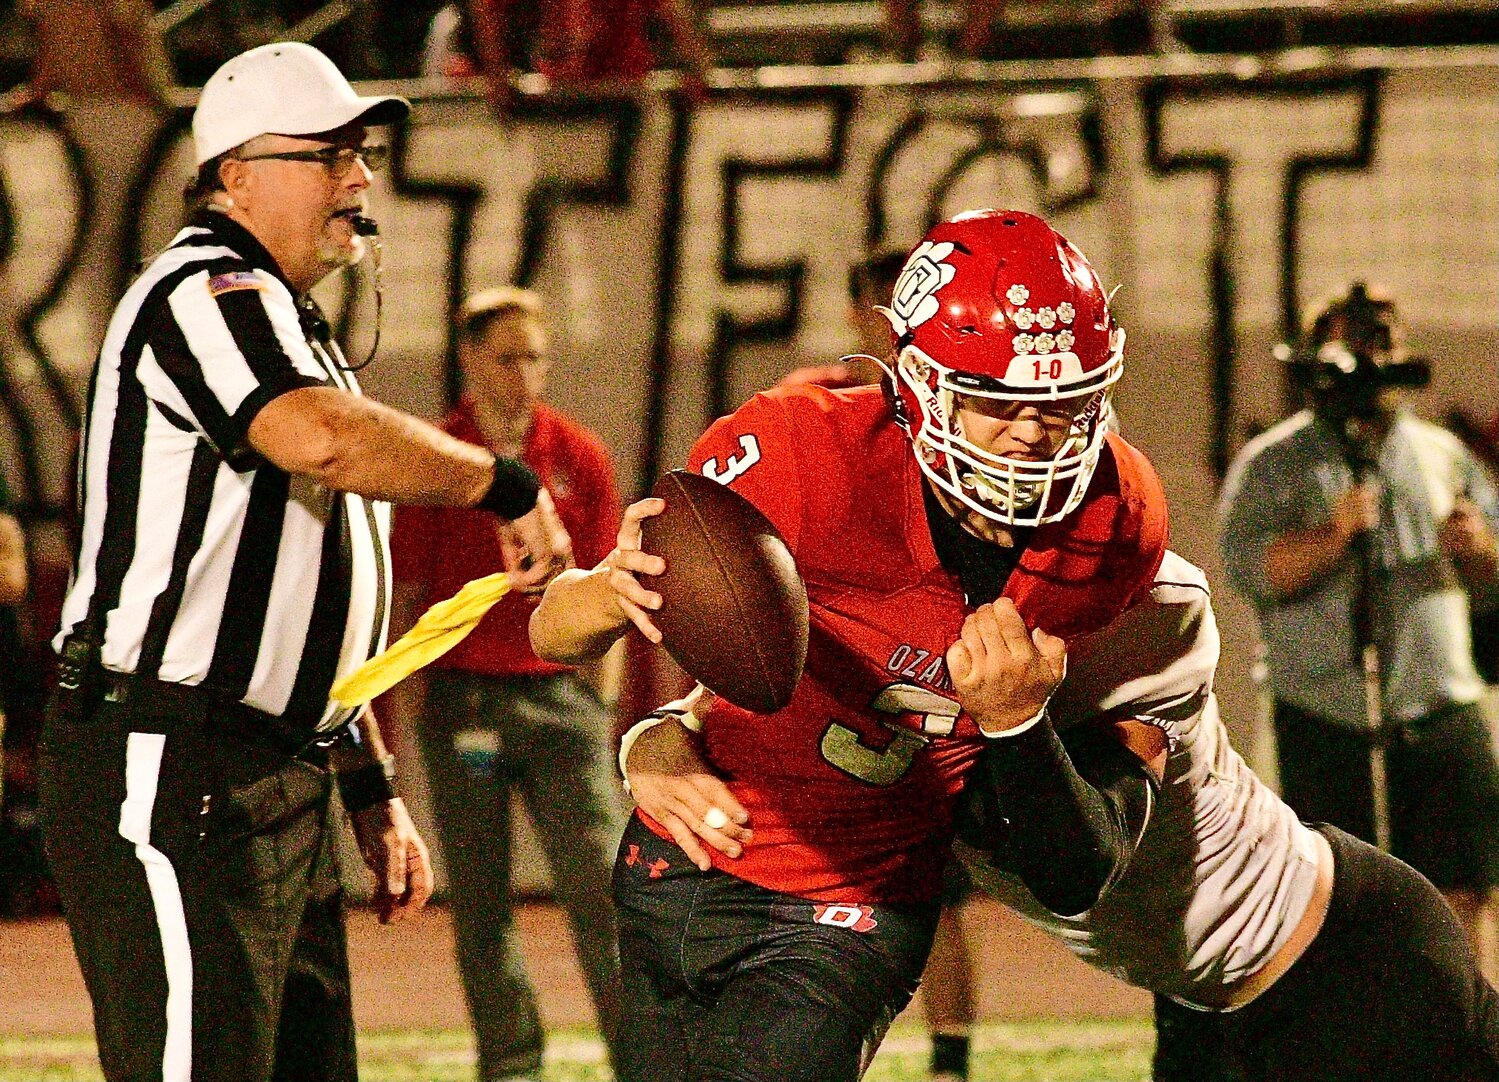 OZARK'S PEYTON RUSSELL tries to escape from a Willard defender as a referee throws a flag.